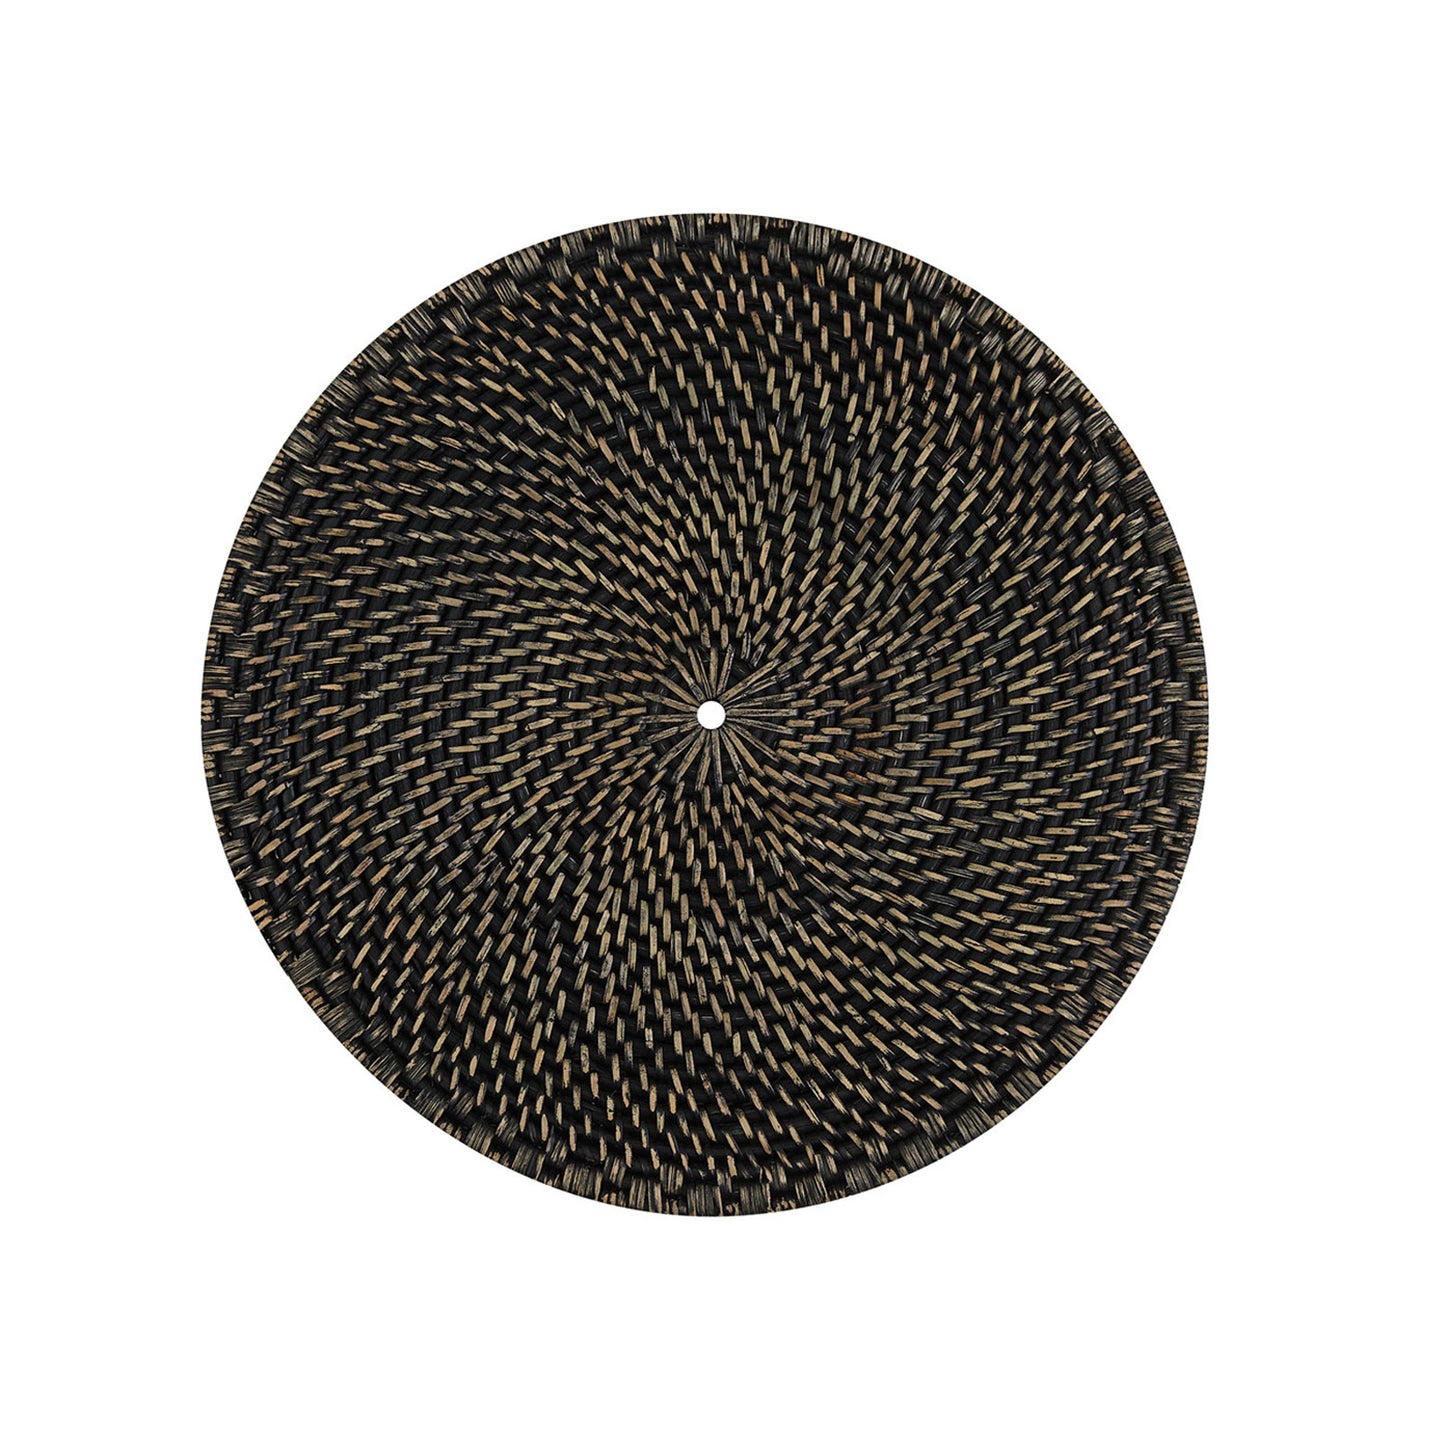 Black Rattan Charger / Placemat